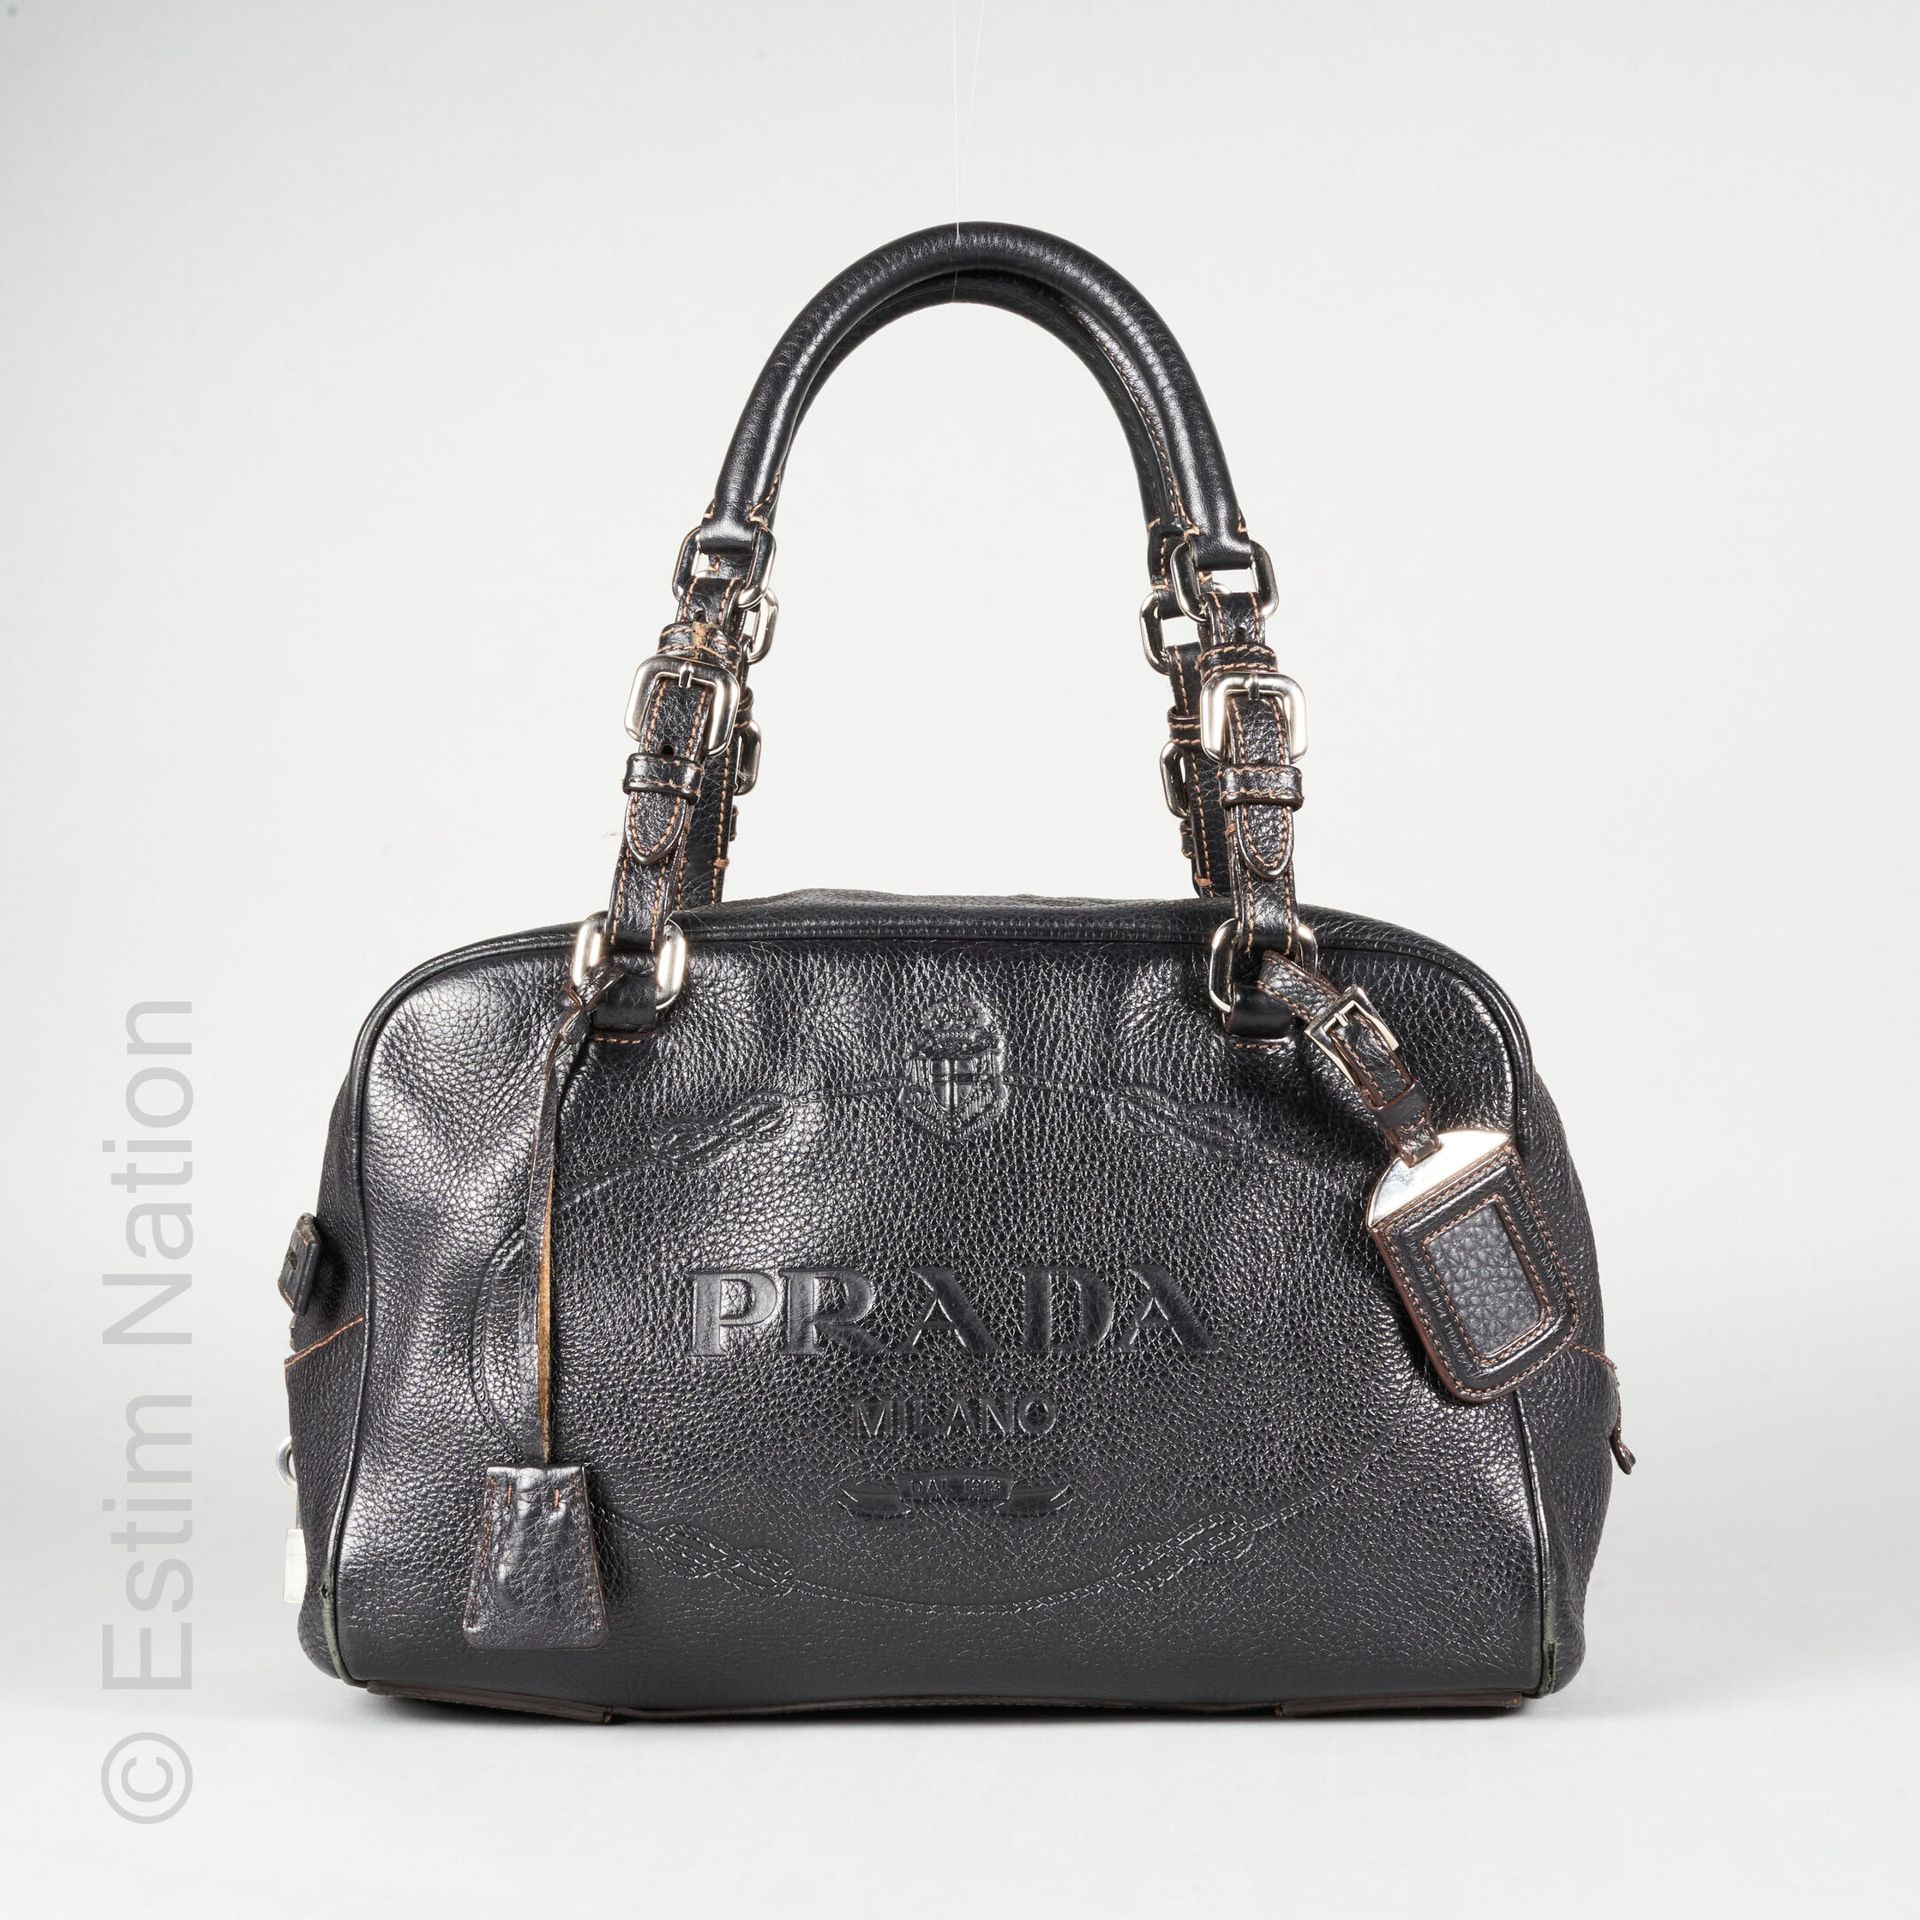 PRADA Rectangular bag in black grained leather stamped with the initials, signed&hellip;